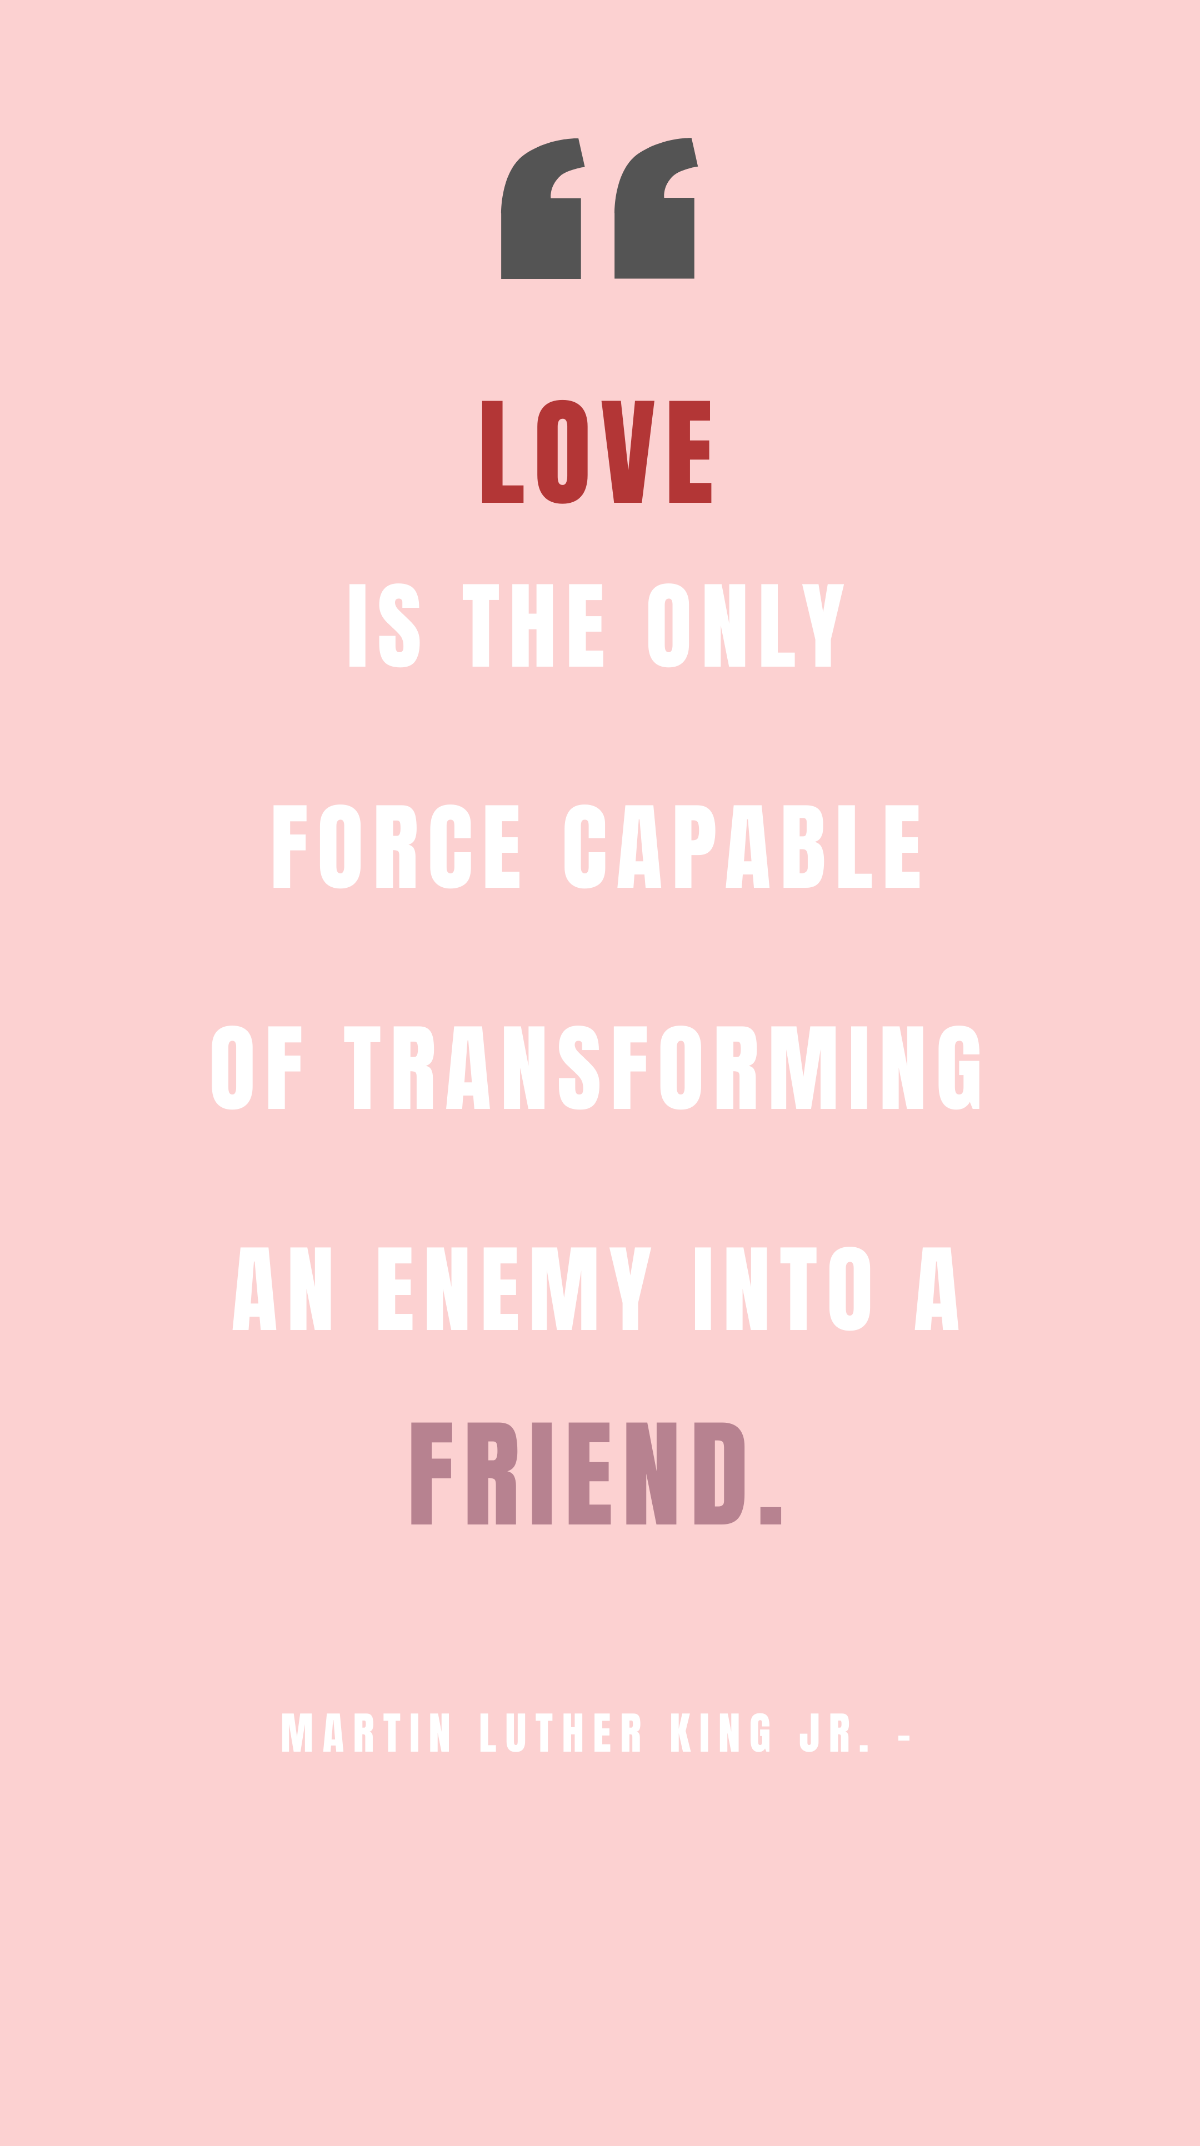 Martin Luther King Jr. - Love is the only force capable of transforming an enemy into a friend.